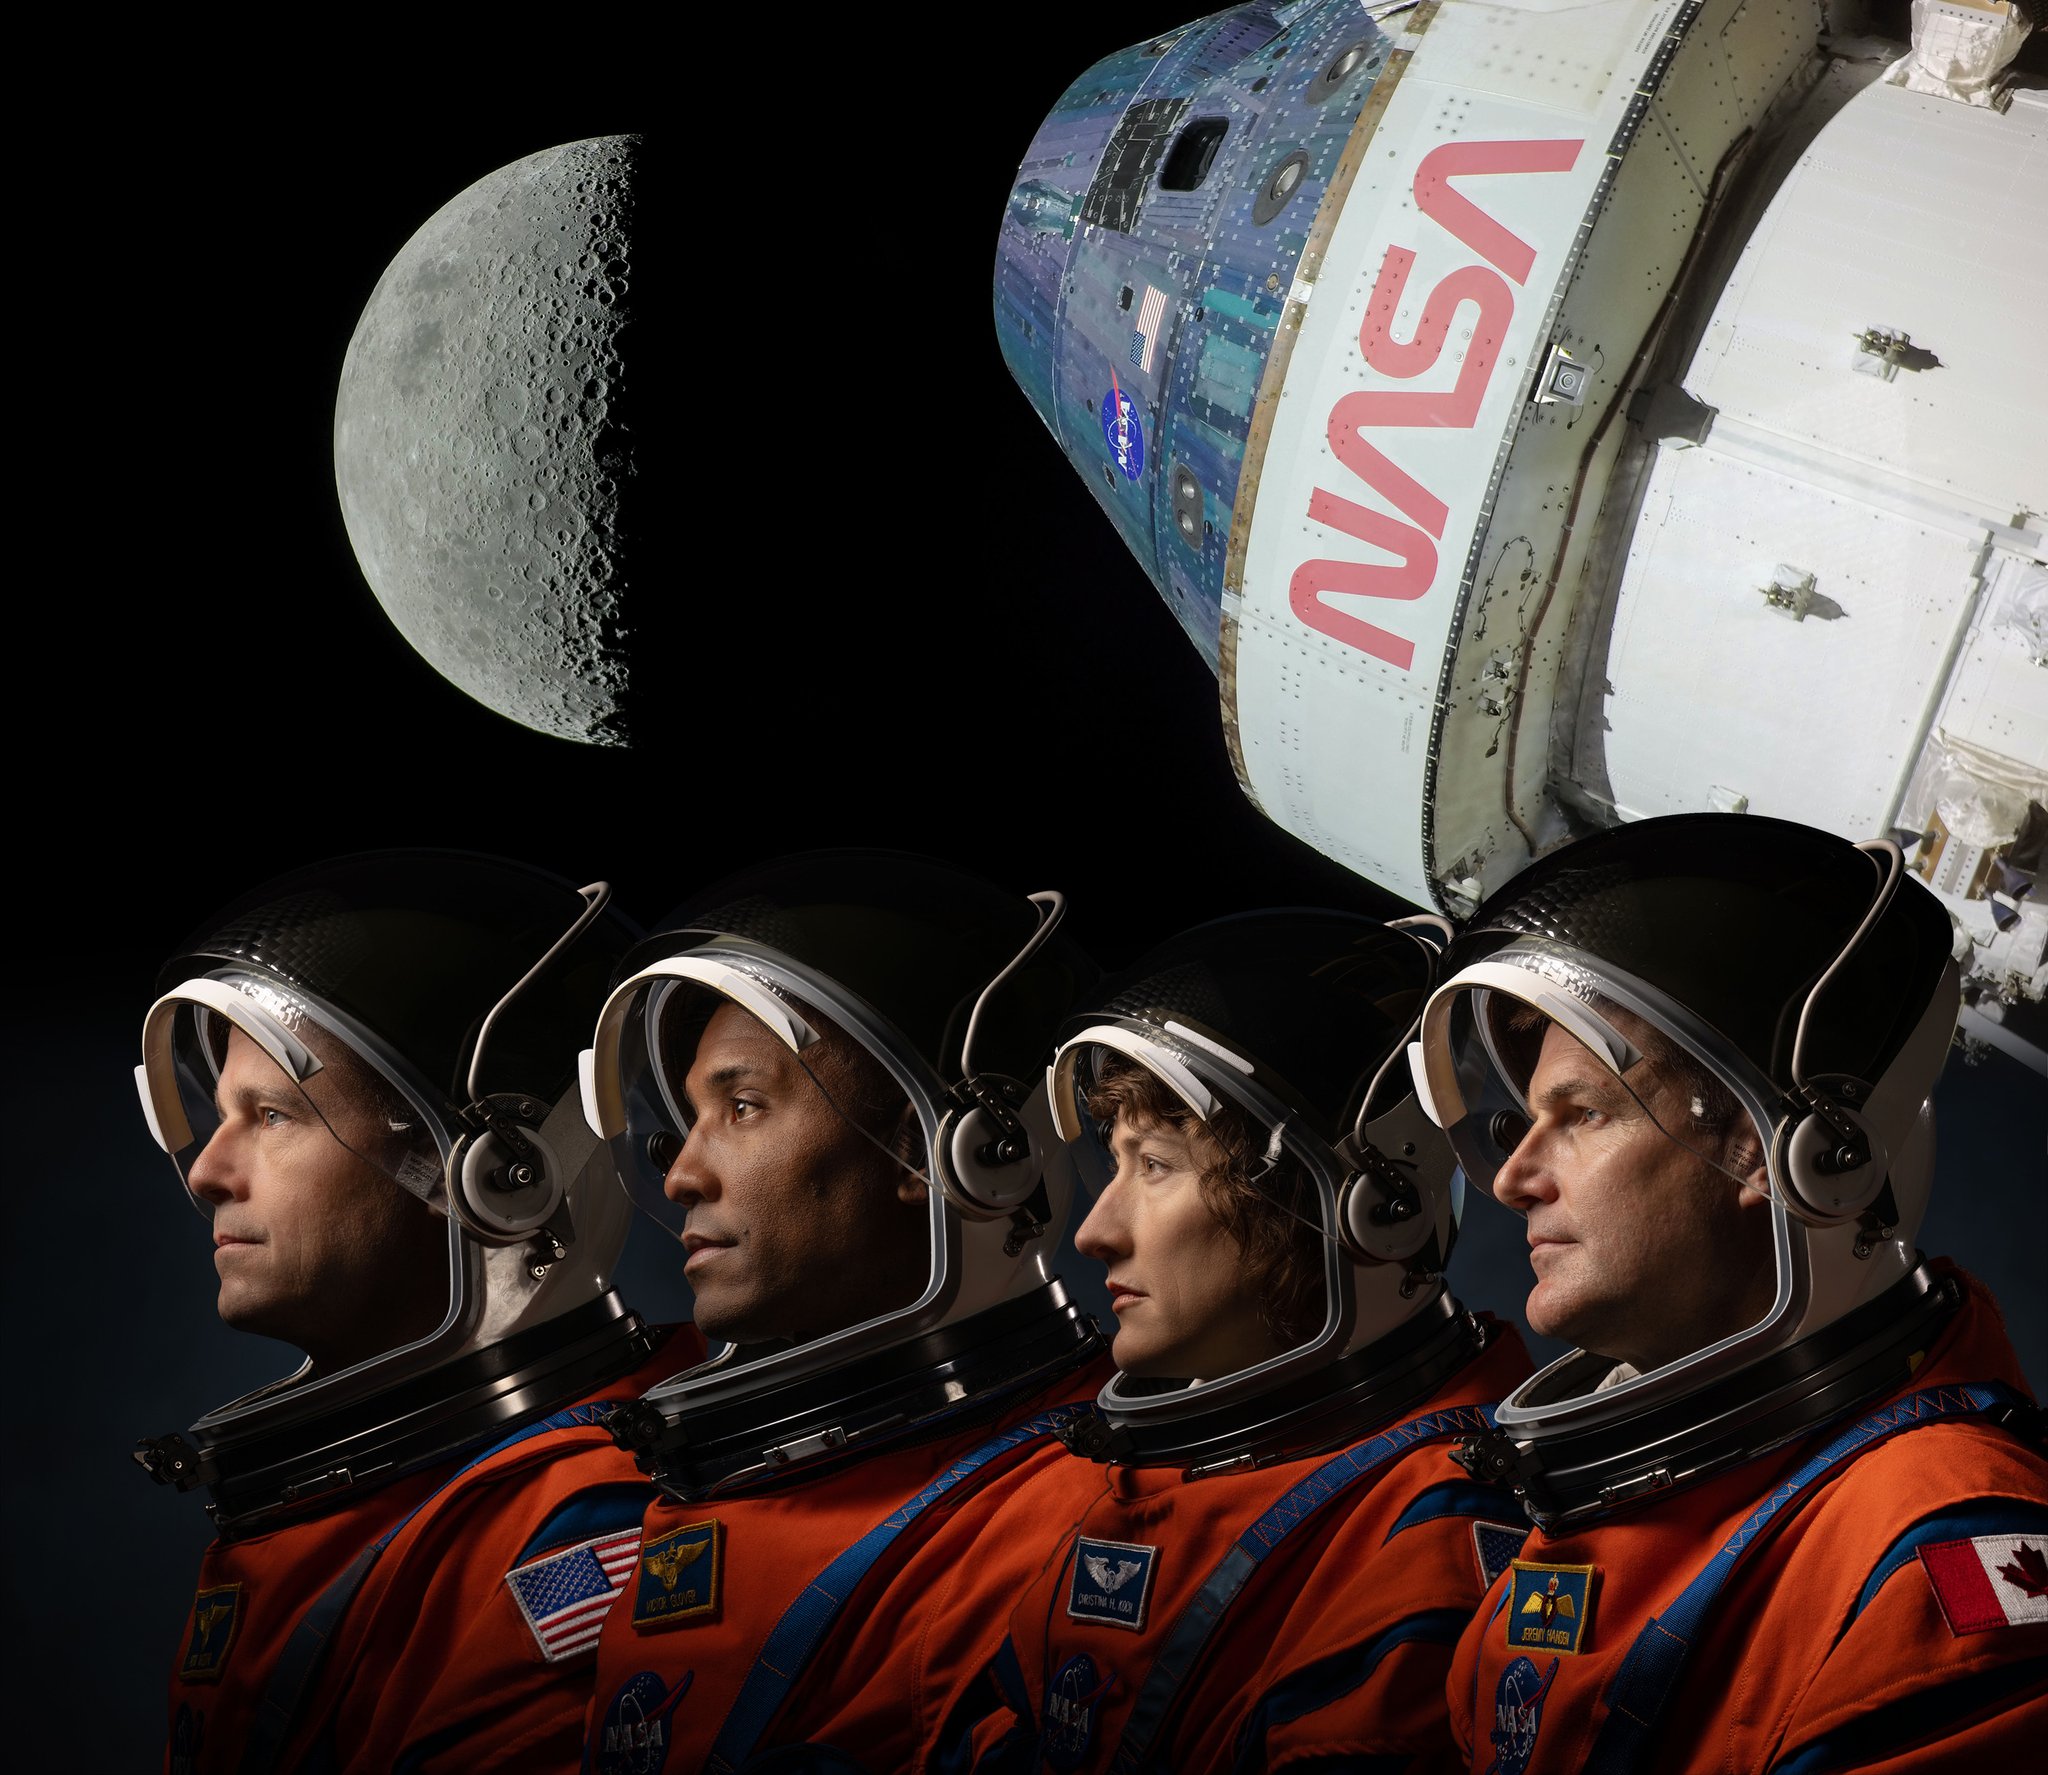 Artemis 2 Astronauts Named – Who Are They?